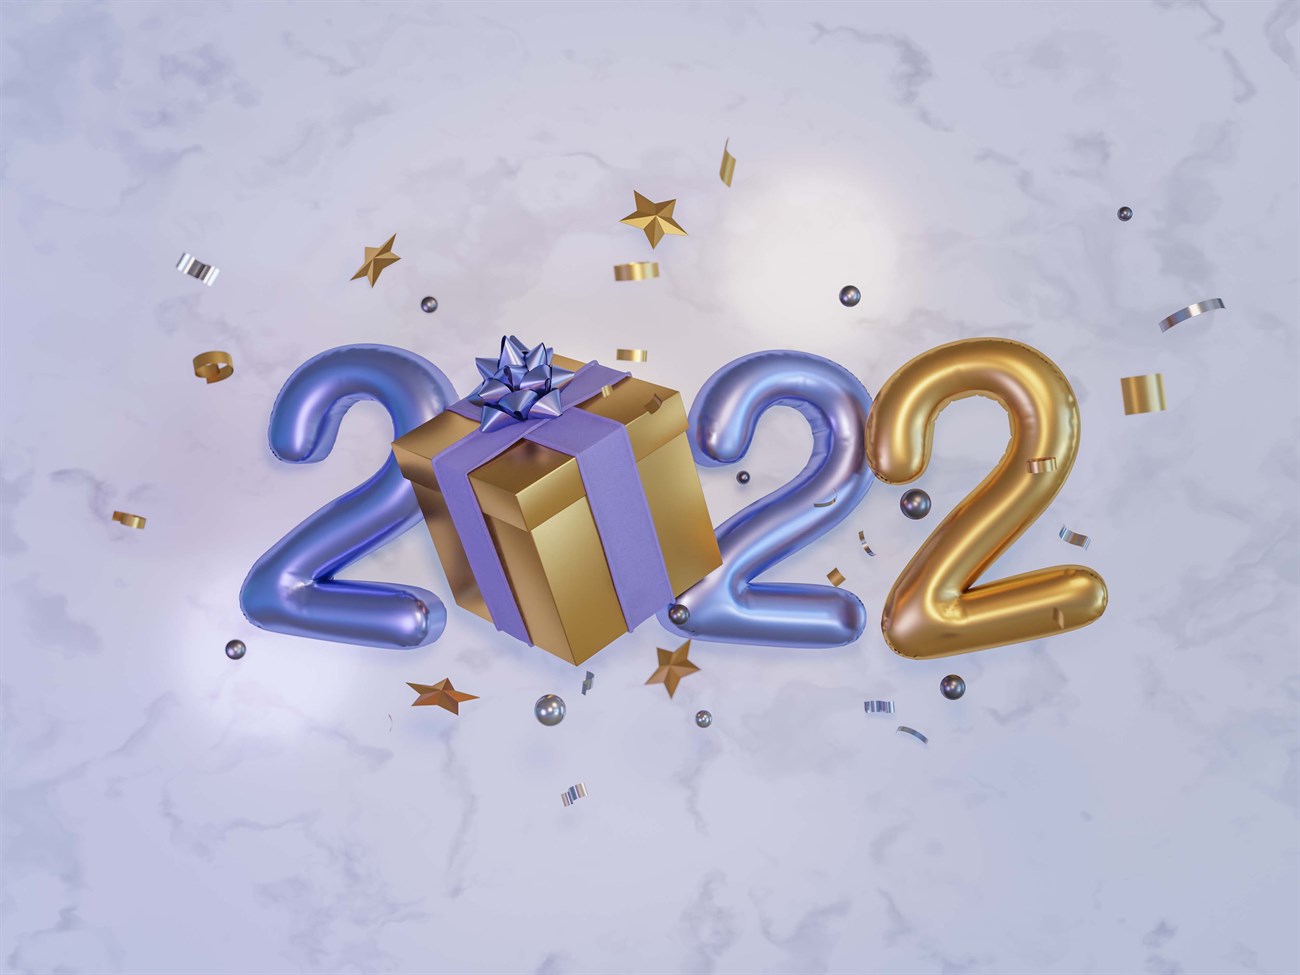 Instructions to immediately download the full set of beautiful and high-quality New Year 2022 laptop wallpapers